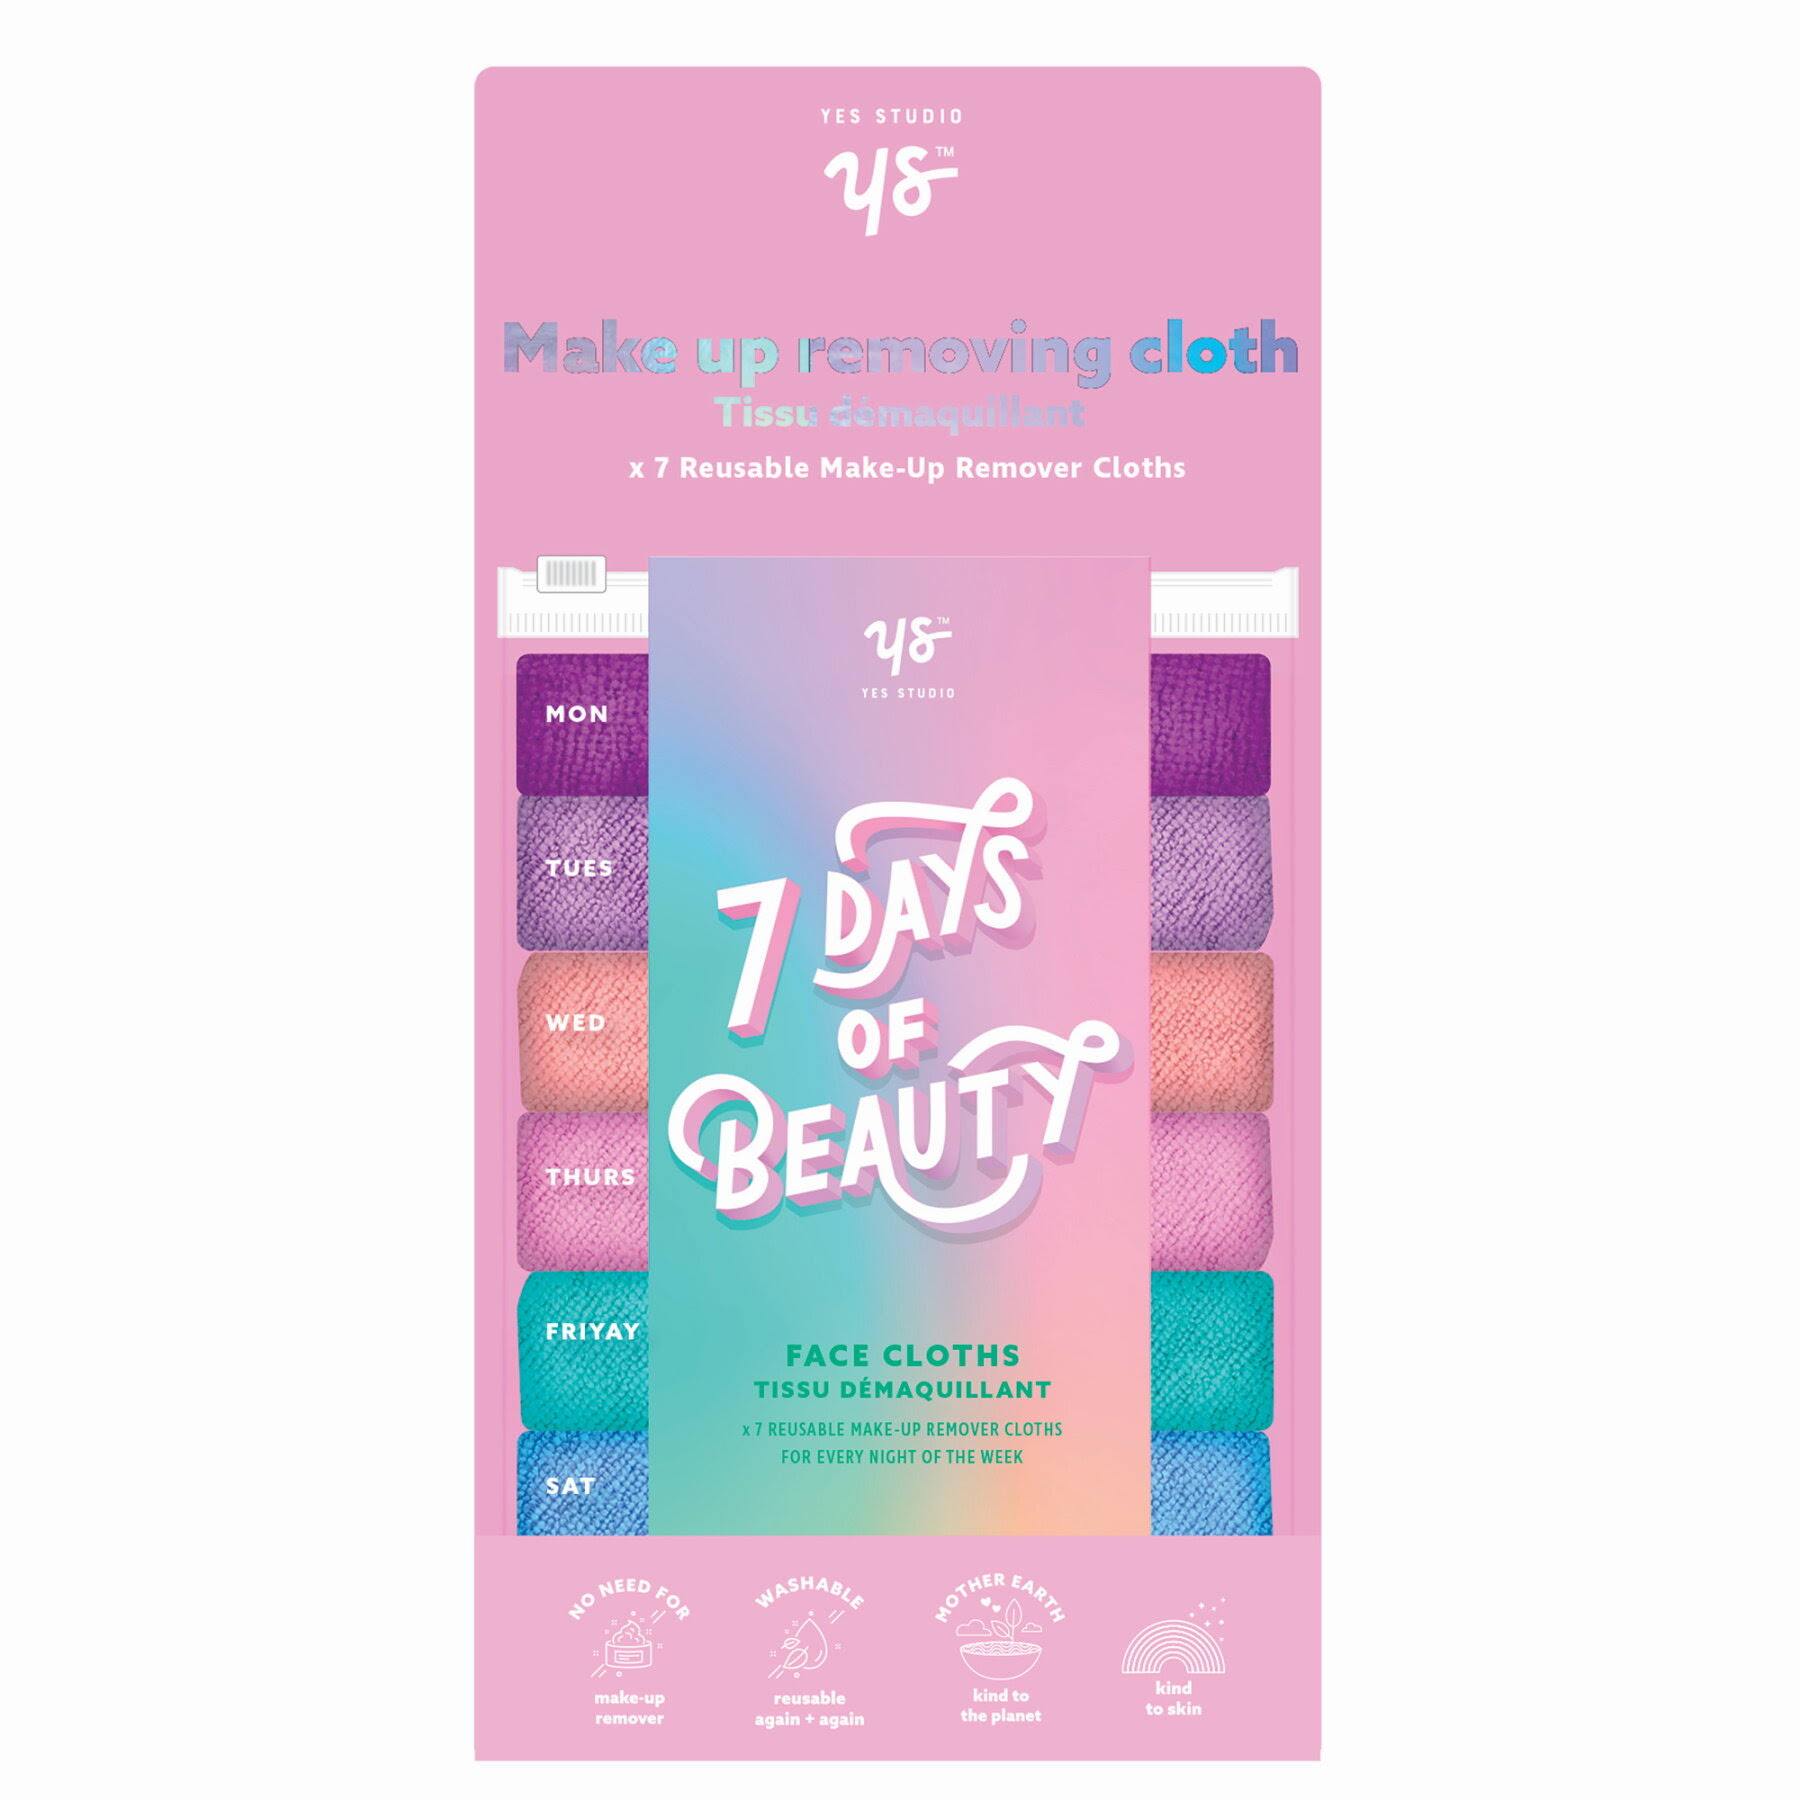 Reusable Make Up Removers Cloths (Yes Studio 7 Days of Beauty )